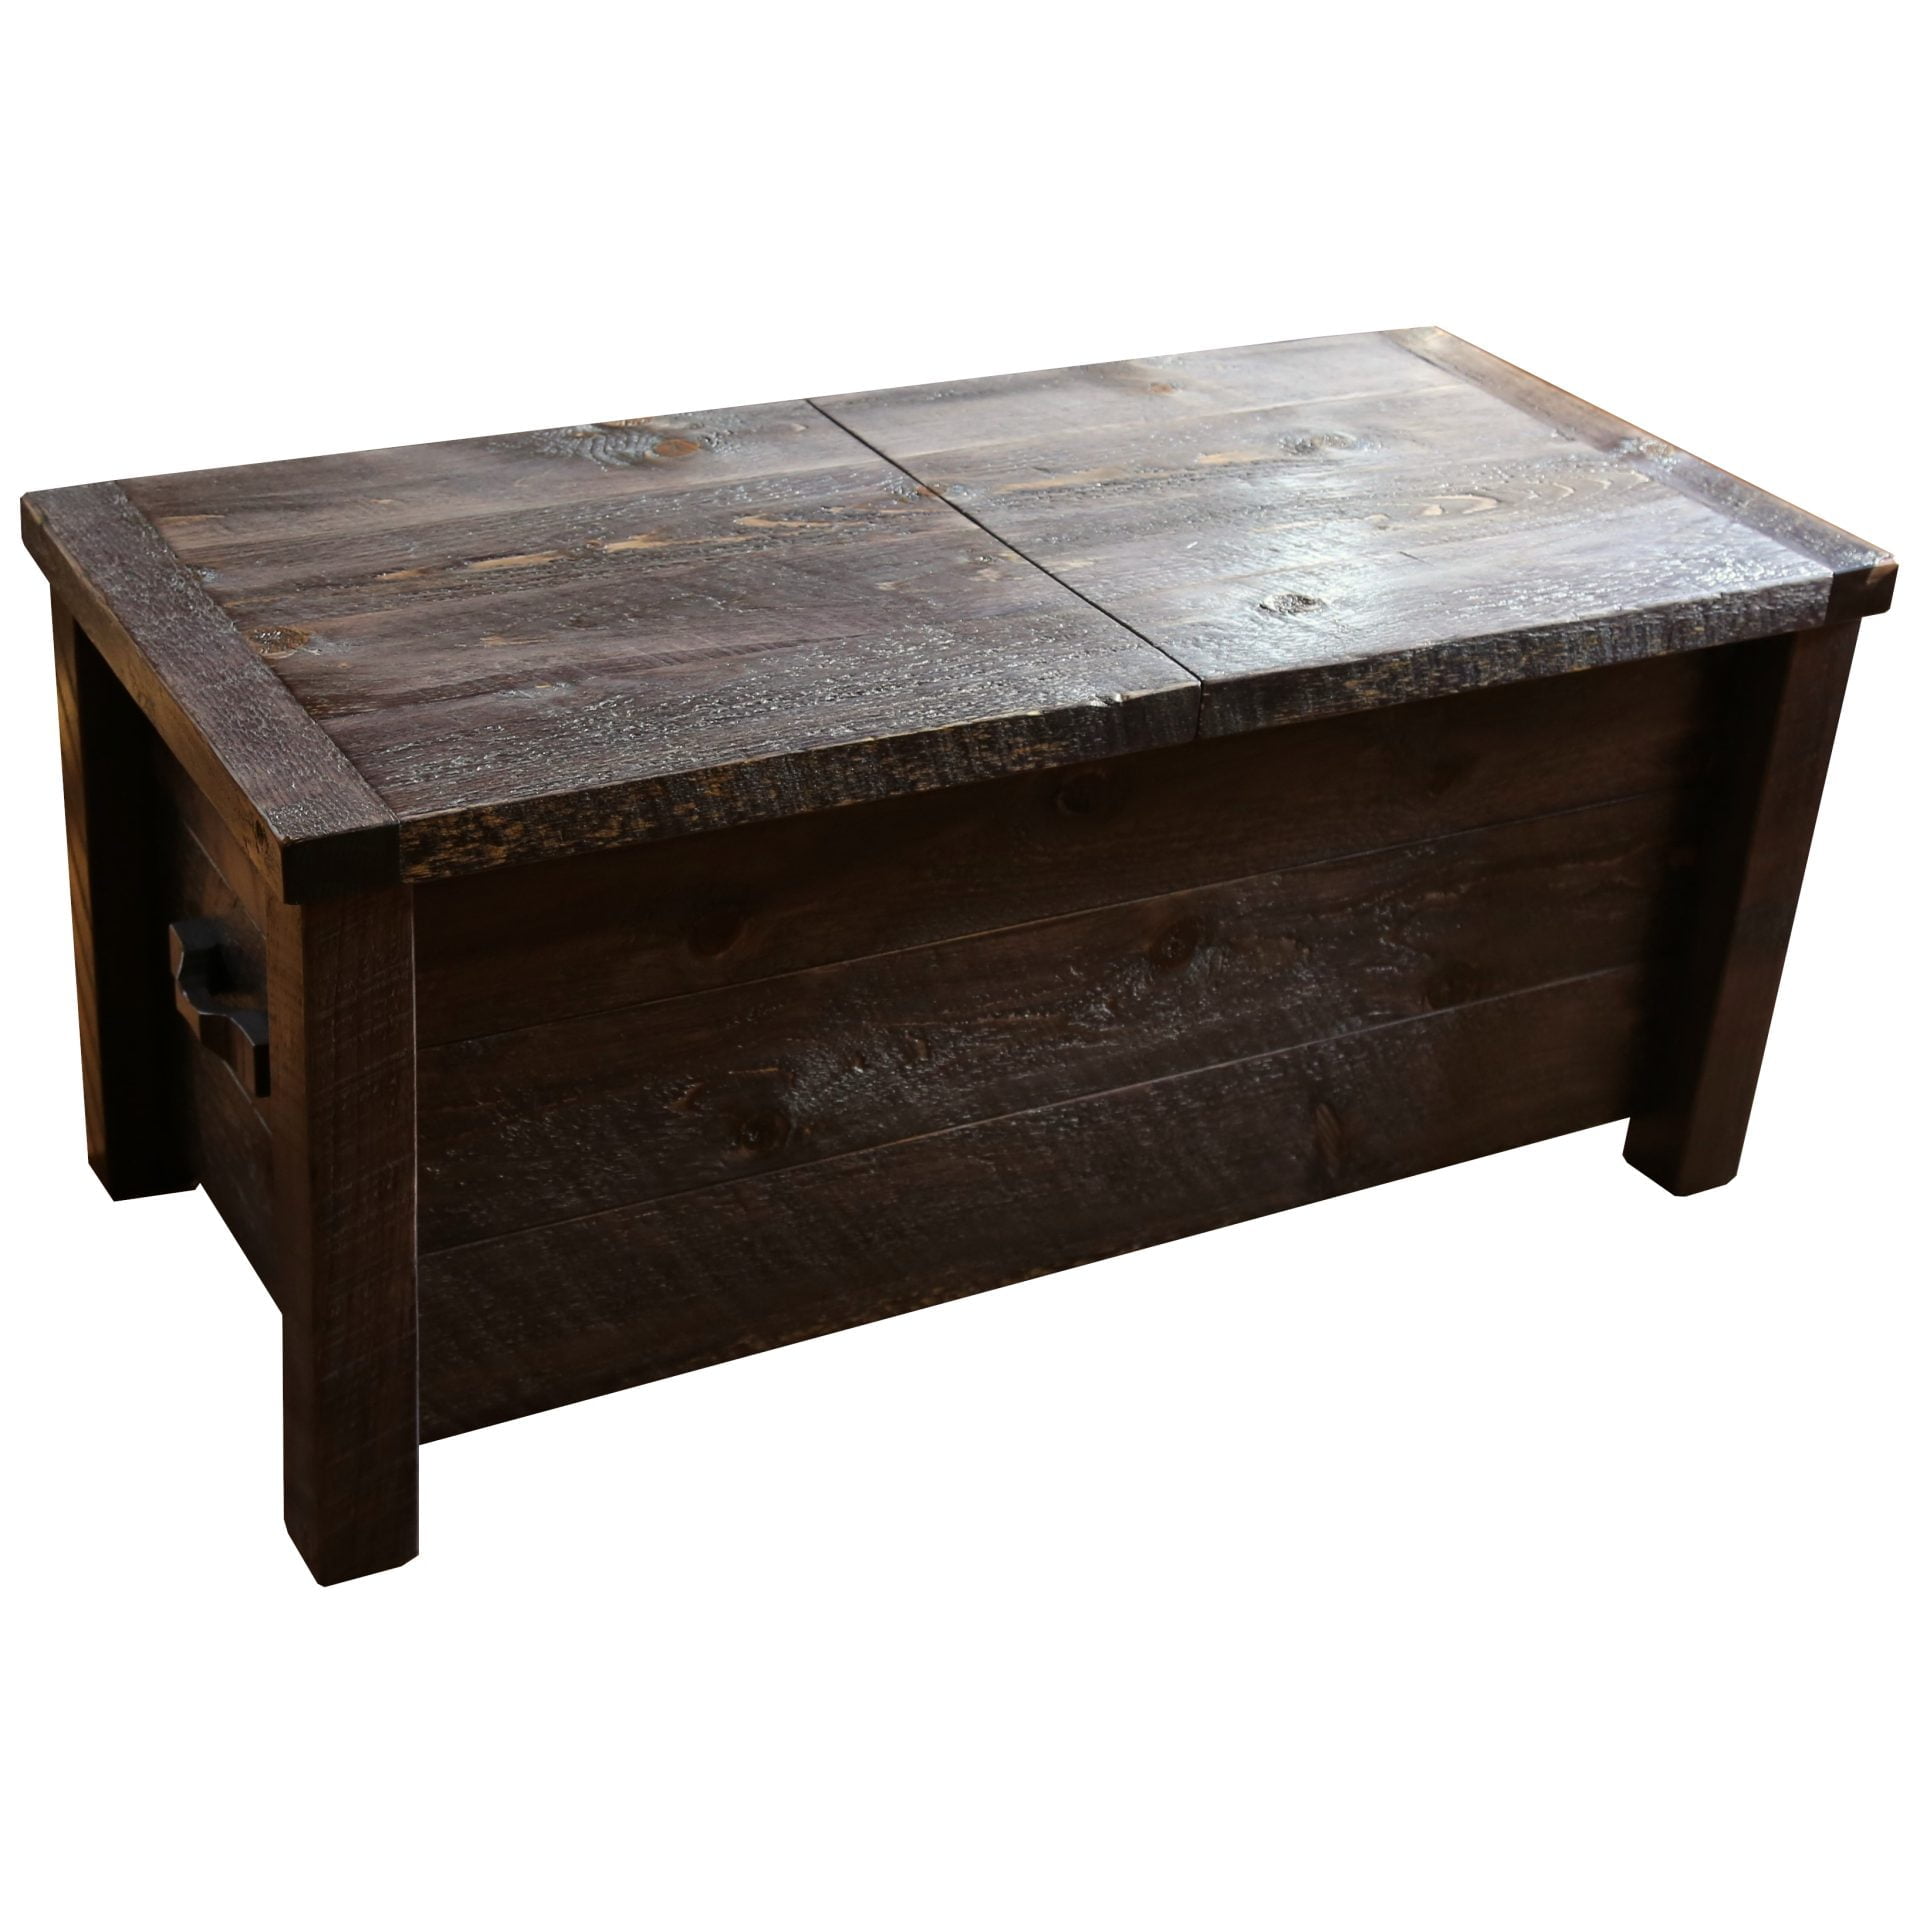 Barnwood Style Timber Peg Coffee Table with Storage